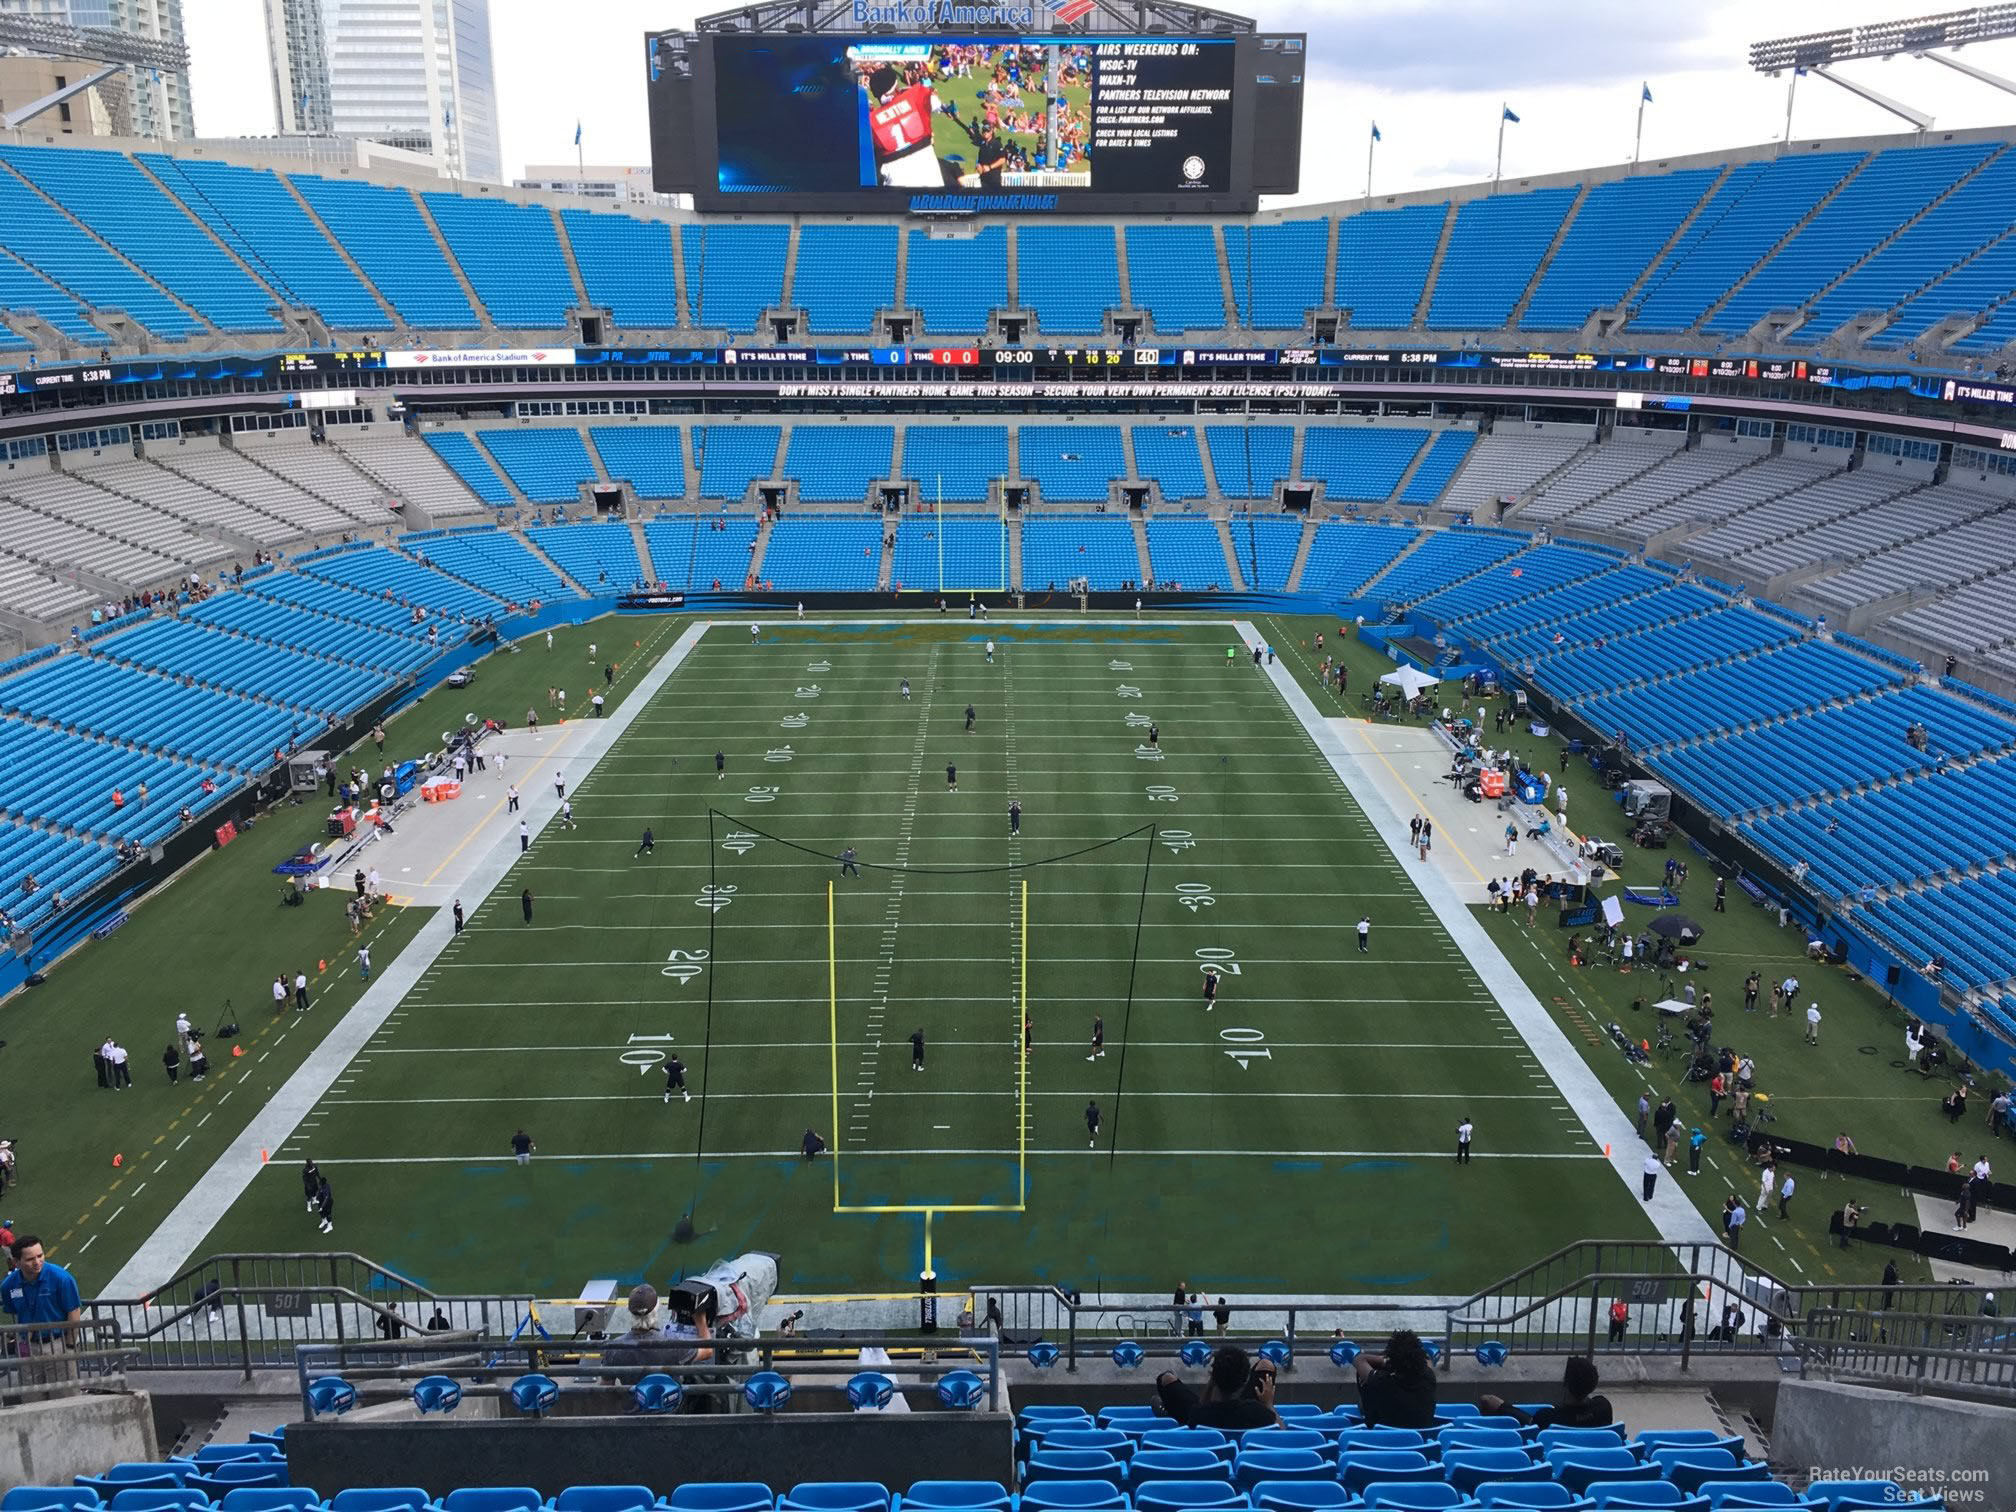 Section 501 at Bank of America Stadium 